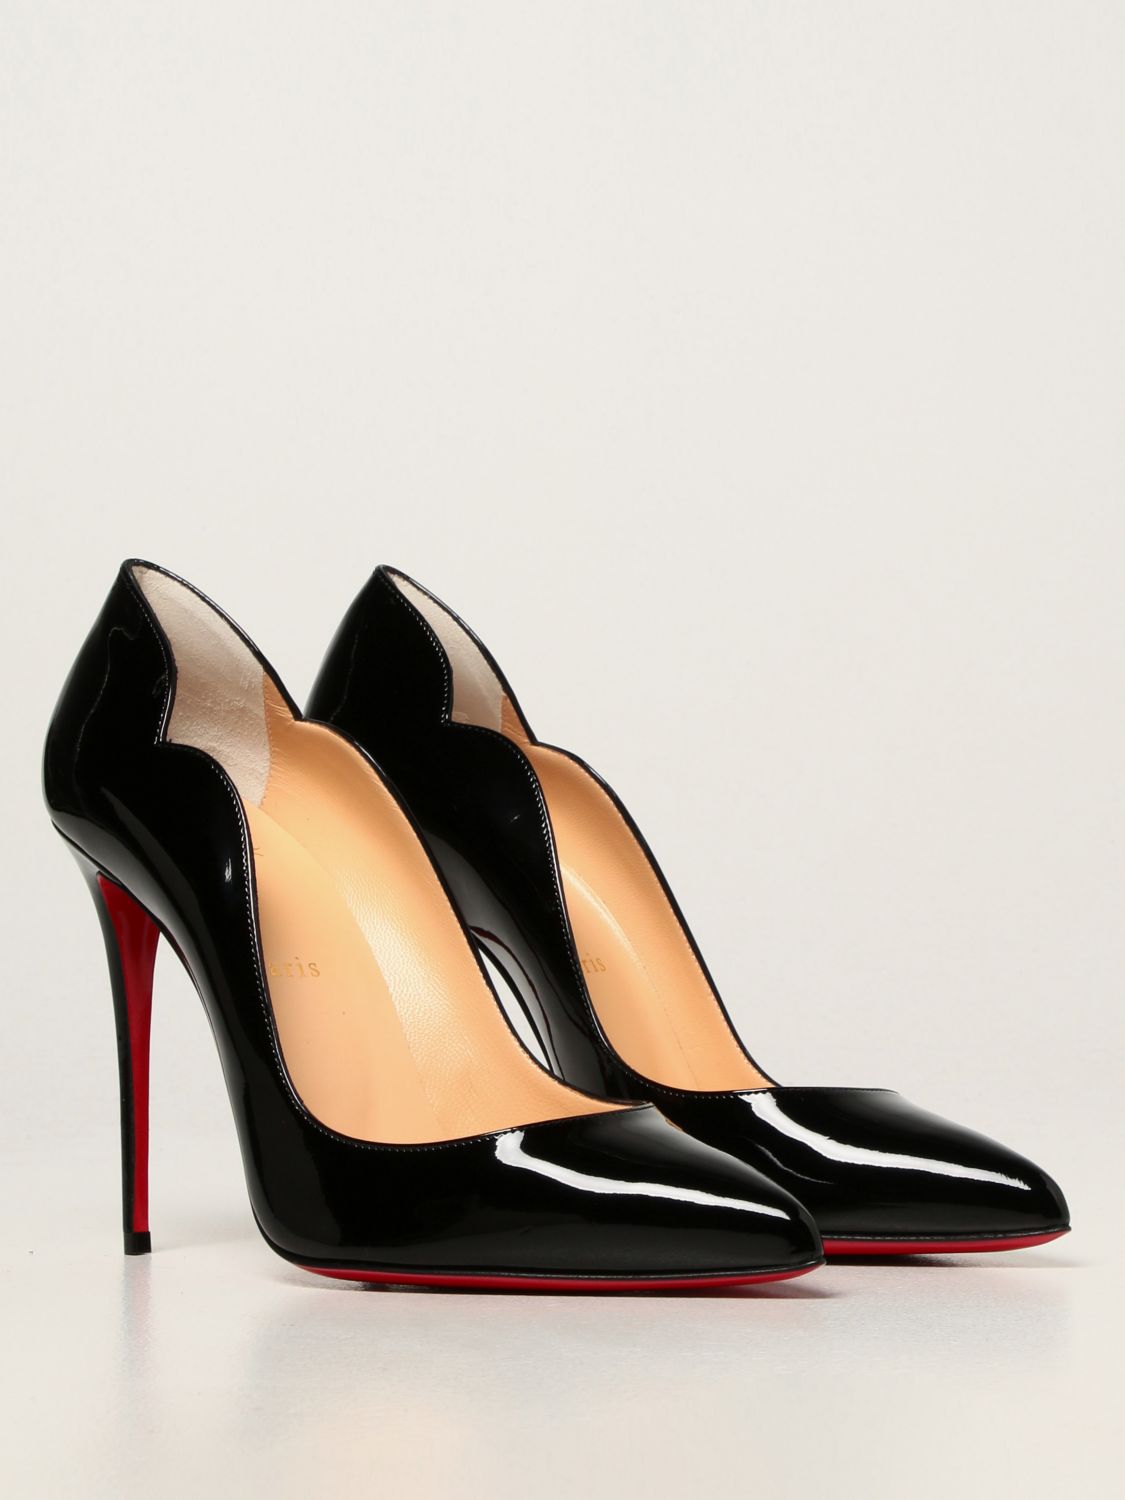 trolley bus heltinde båd CHRISTIAN LOUBOUTIN: Hot Chick patent leather pumps | Pumps Christian  Louboutin Women Black | Pumps Christian Louboutin 1190911 GIGLIO.COM